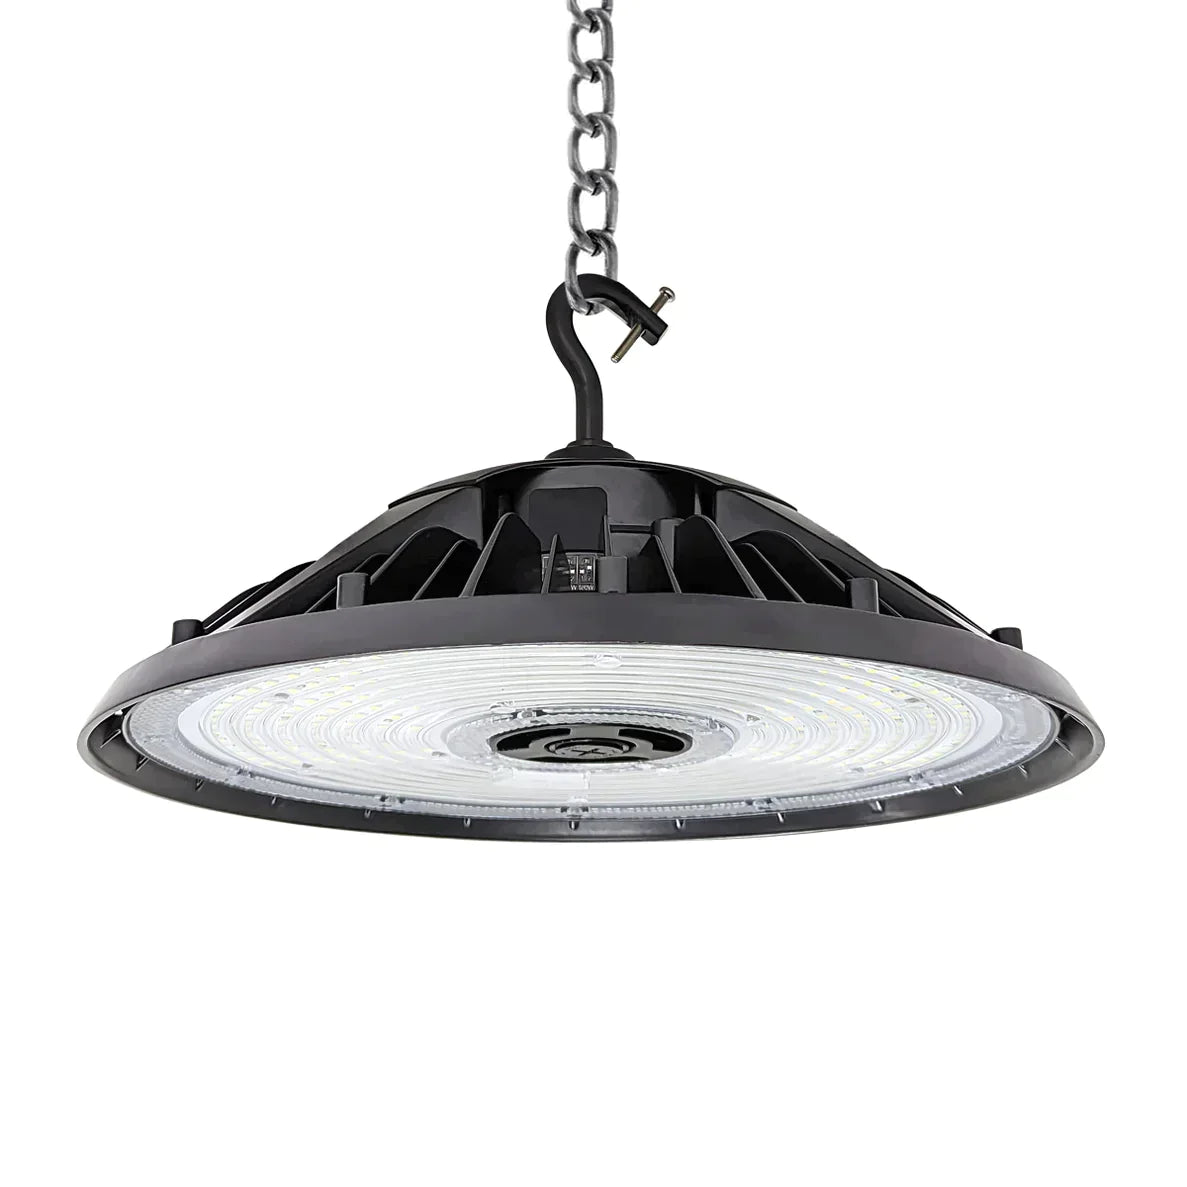 RHB04-240W Selectable High Lumen UFO LED High Bay - Up to 41,300 Lumens